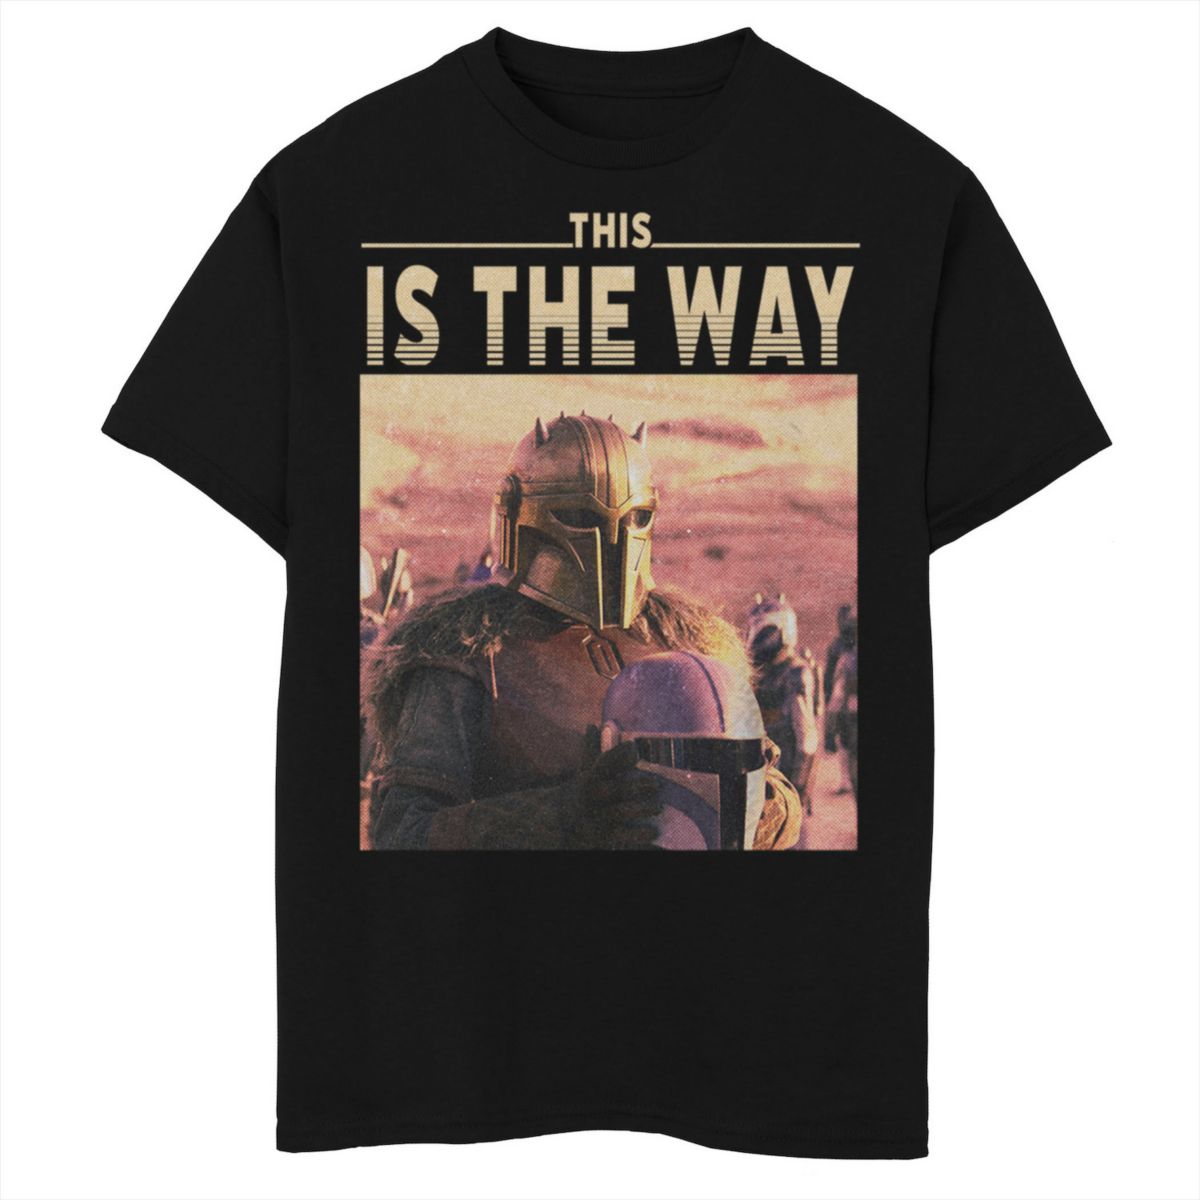 Boys Husky Star Wars The Mandalorian This Is The Way Graphic Tee Star Wars